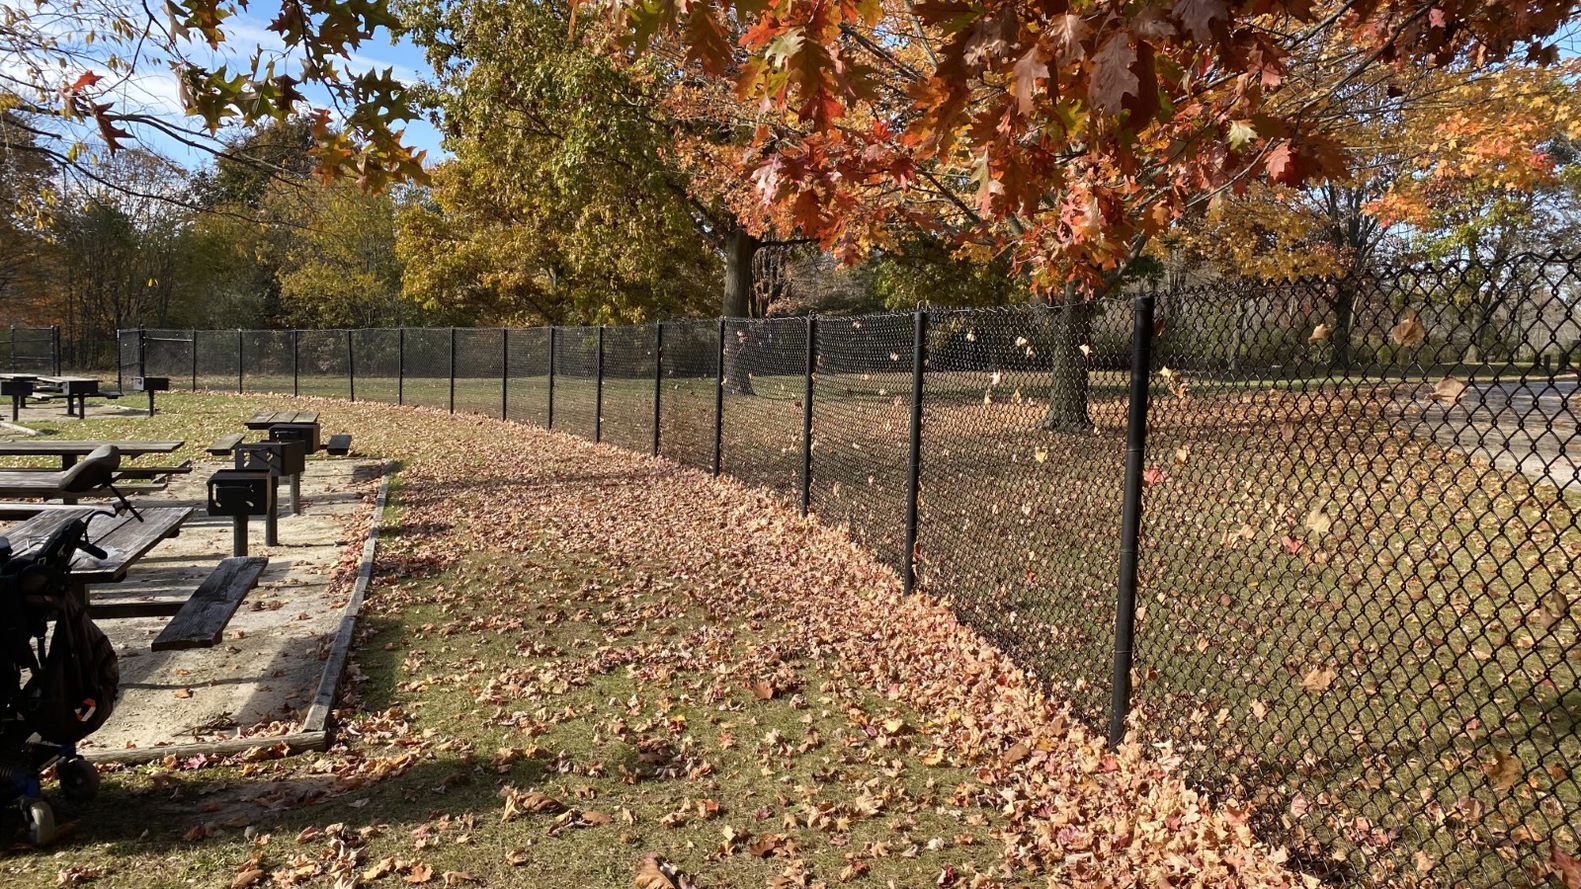 North American Chain Link Fencing